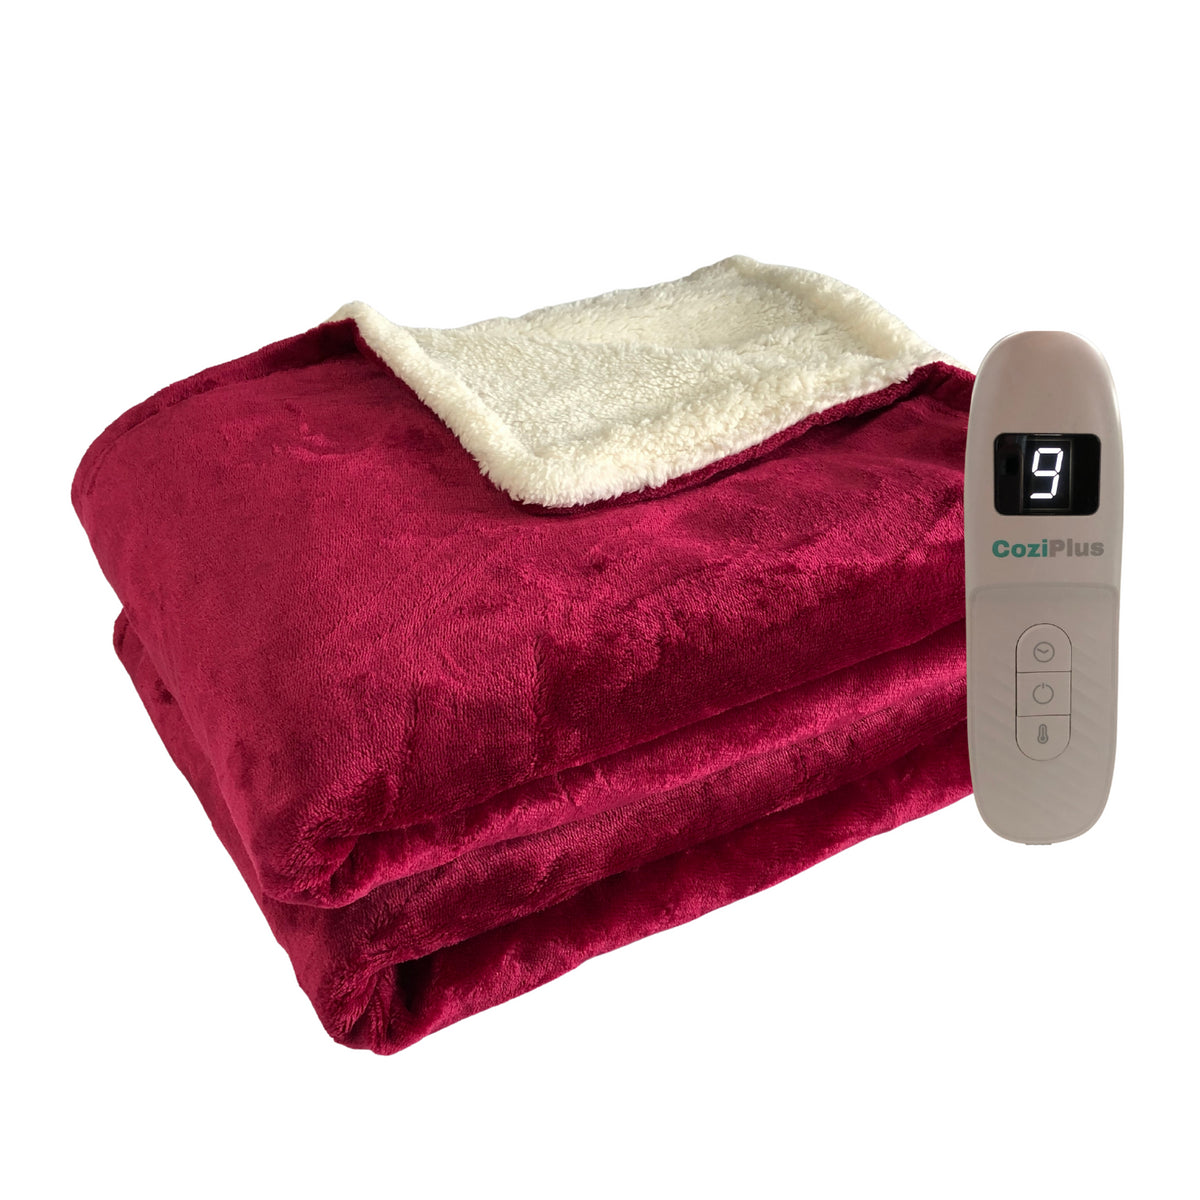 Neatly folded raspberry red heated throw with controller